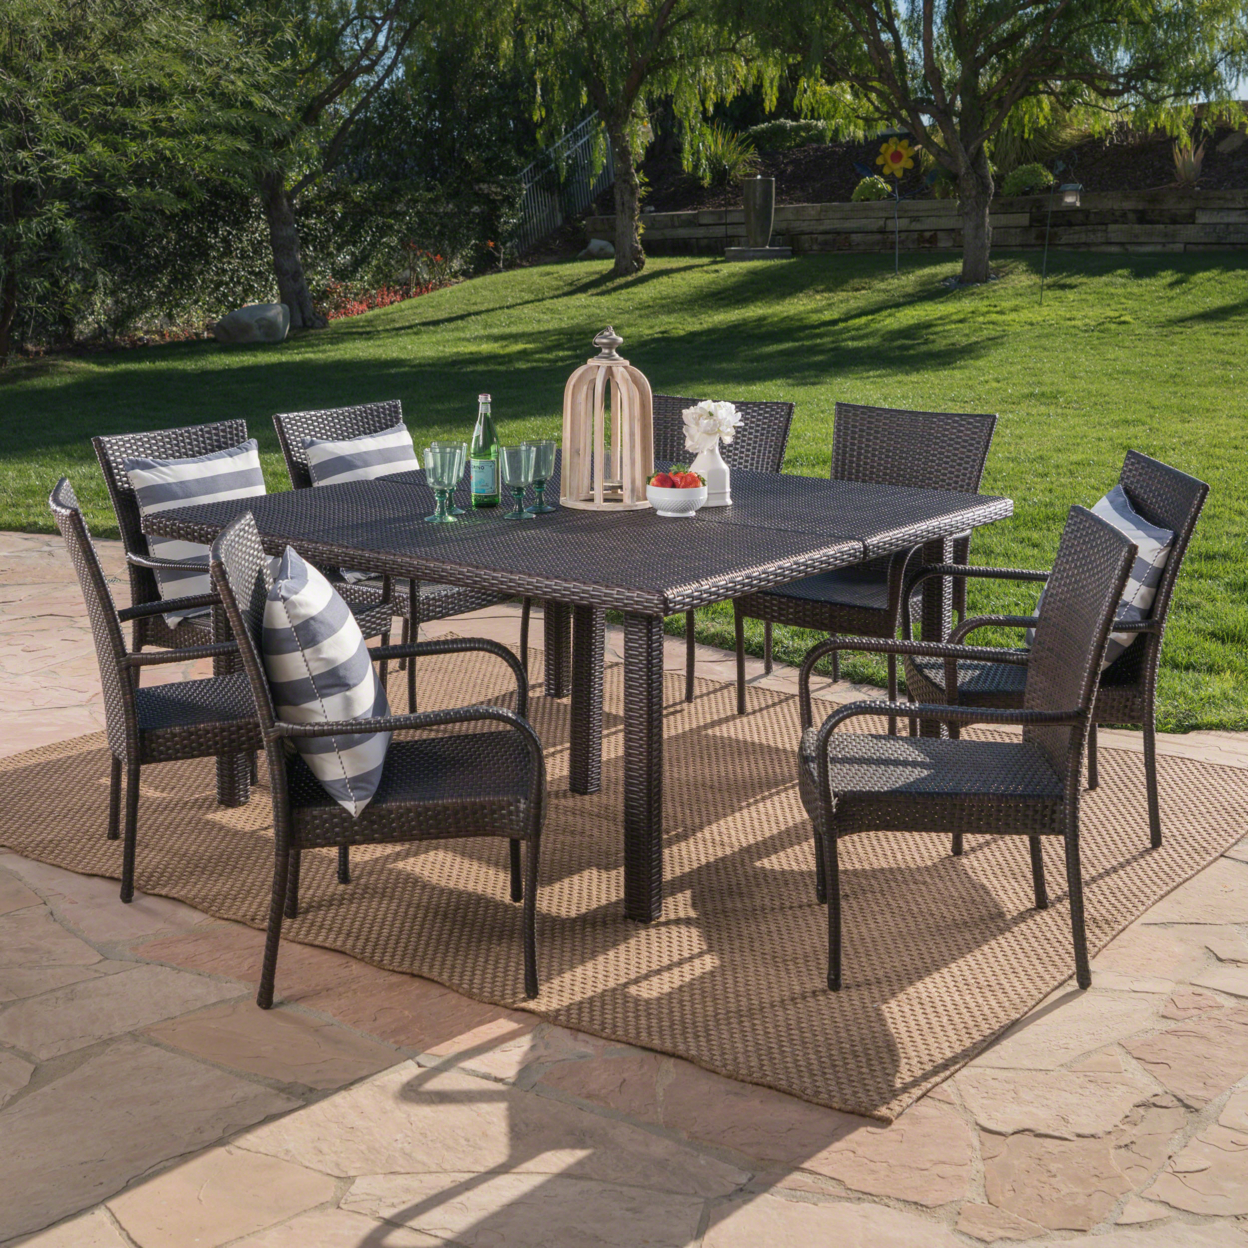 Fern Outdoor 9 Piece Stacking Wicker Square Dining Set - Multi-brown